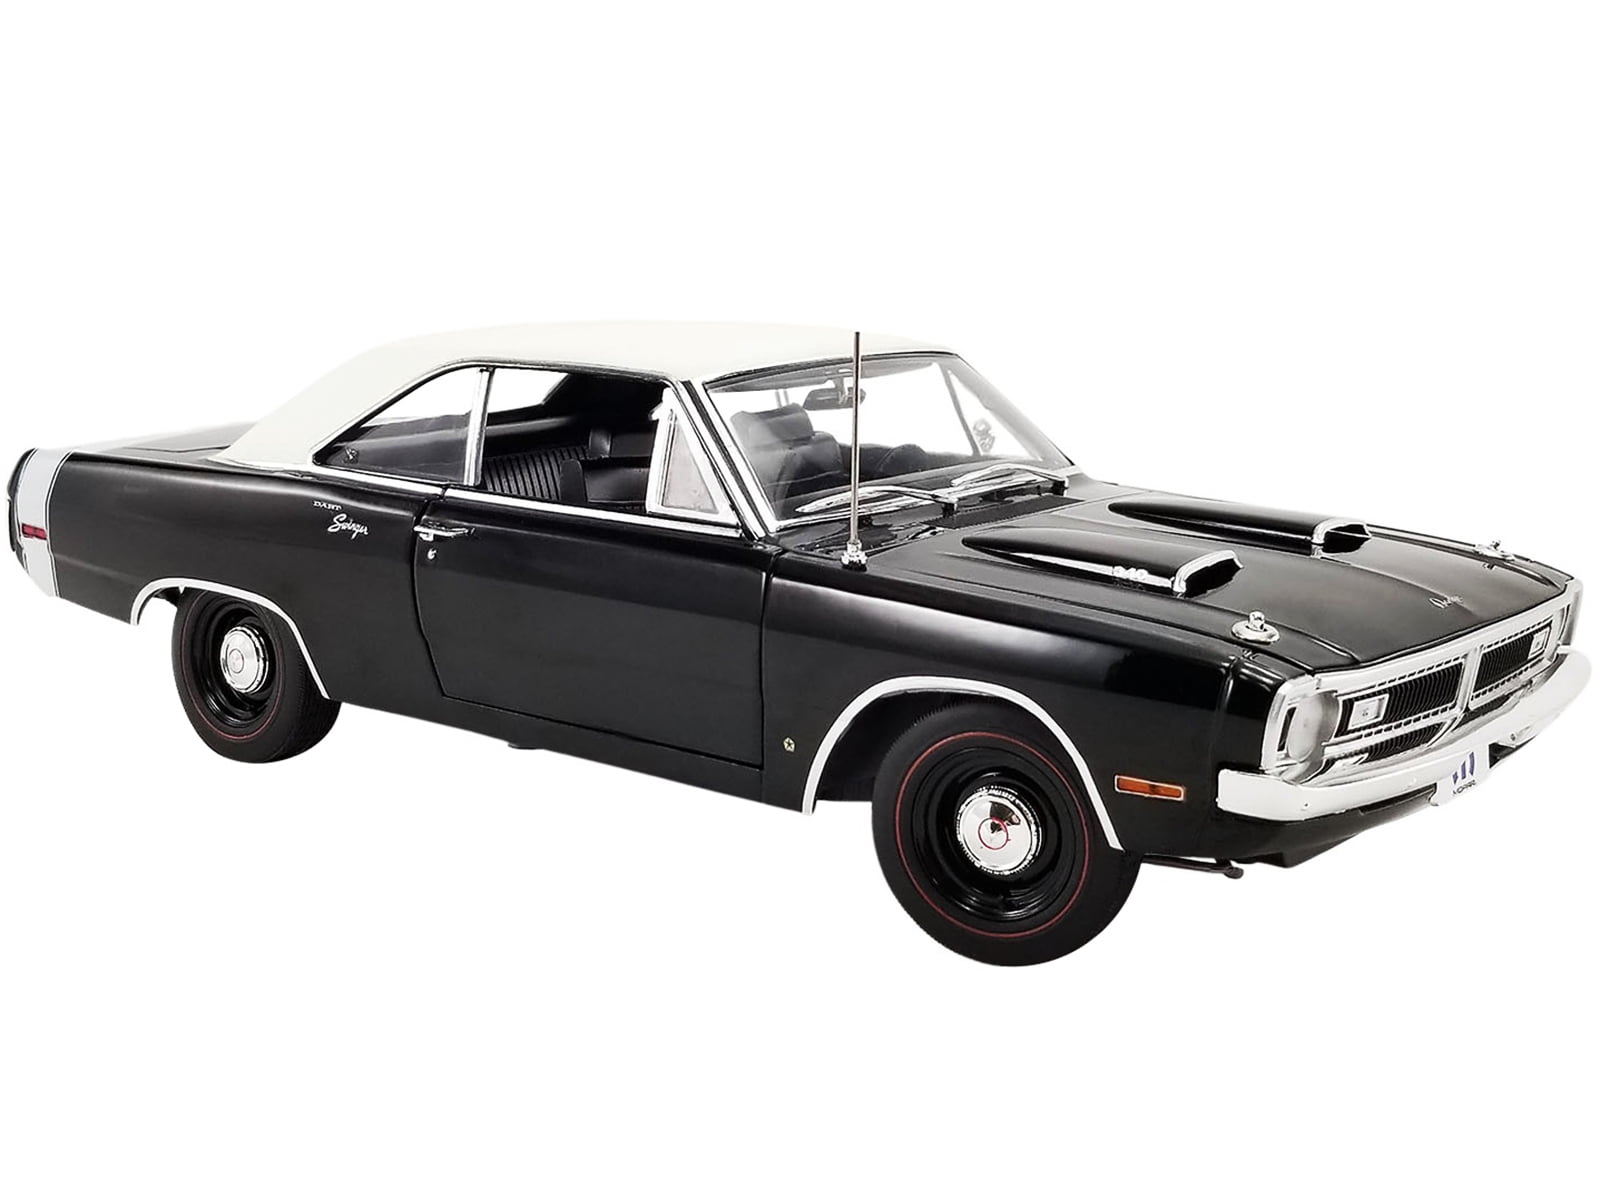 1970 Dodge Dart Swinger 340 Black with White Vinyl Top and White Tail Stripe Ltd Ed to 536 pcs 1/18 Diecast Model Car by ACME pic